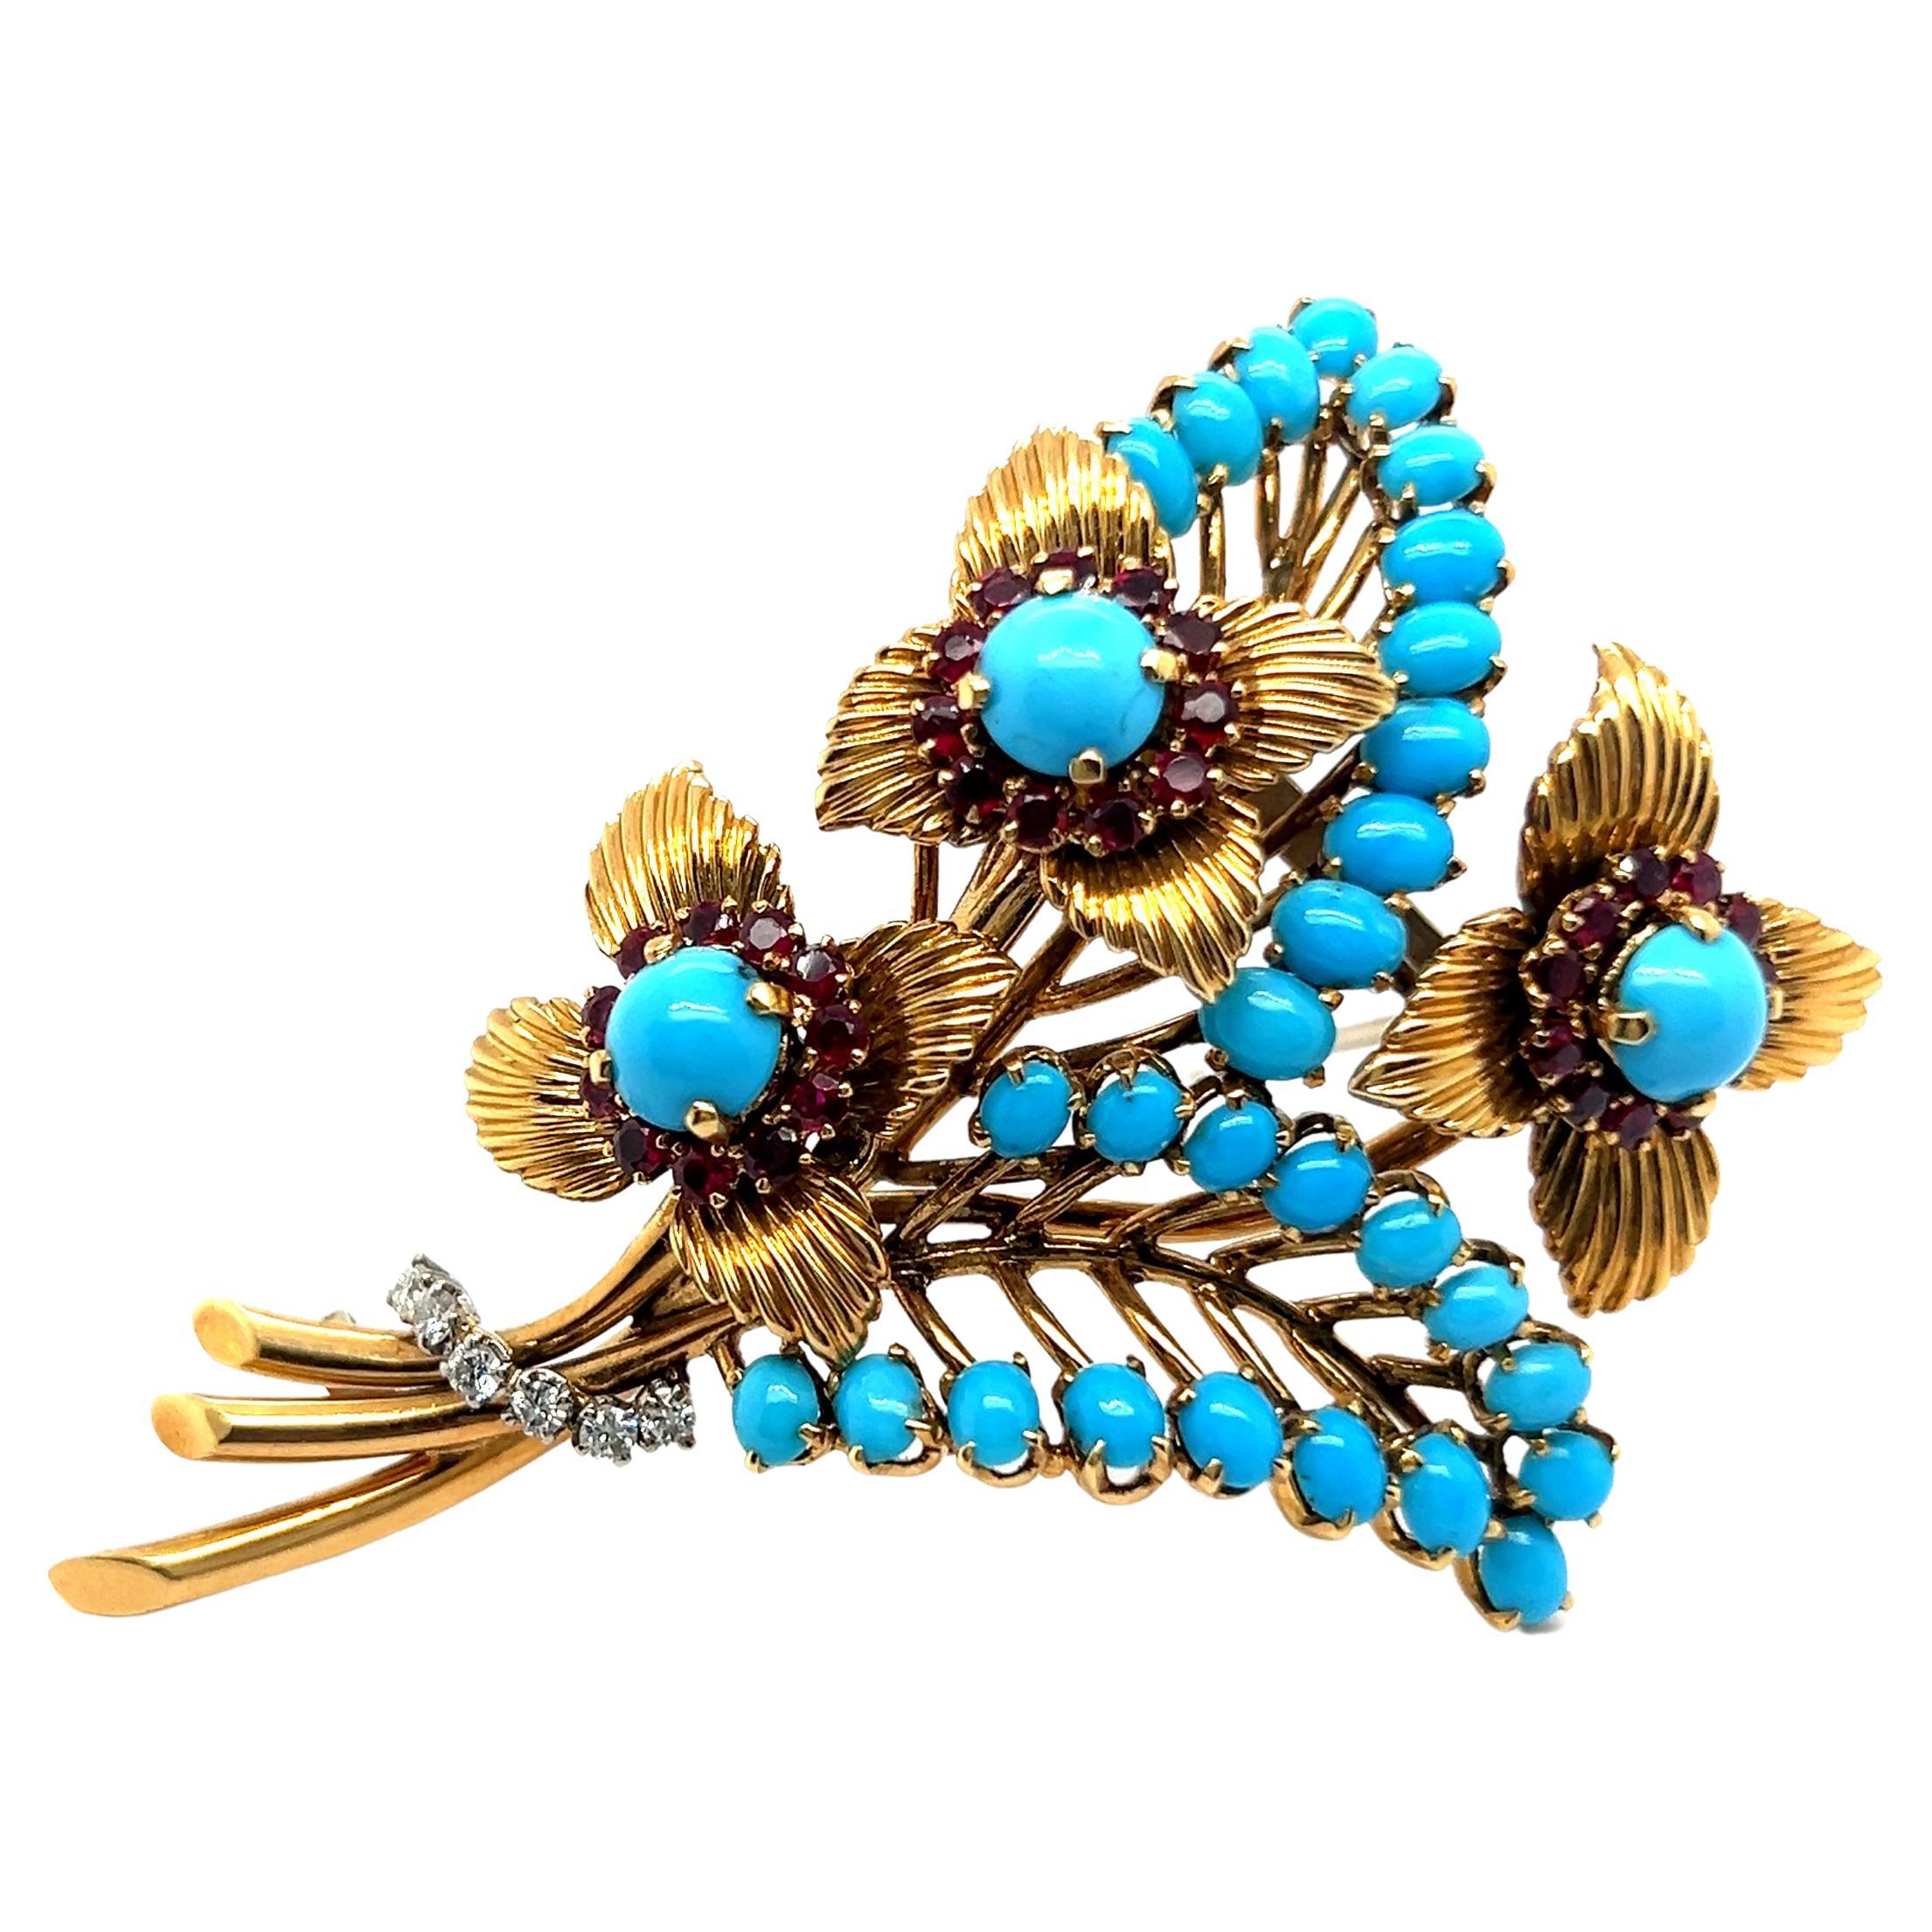 Brooch with Turquoise, Rubies & Diamonds in 18 Karat Yellow Gold by Gübelin For Sale